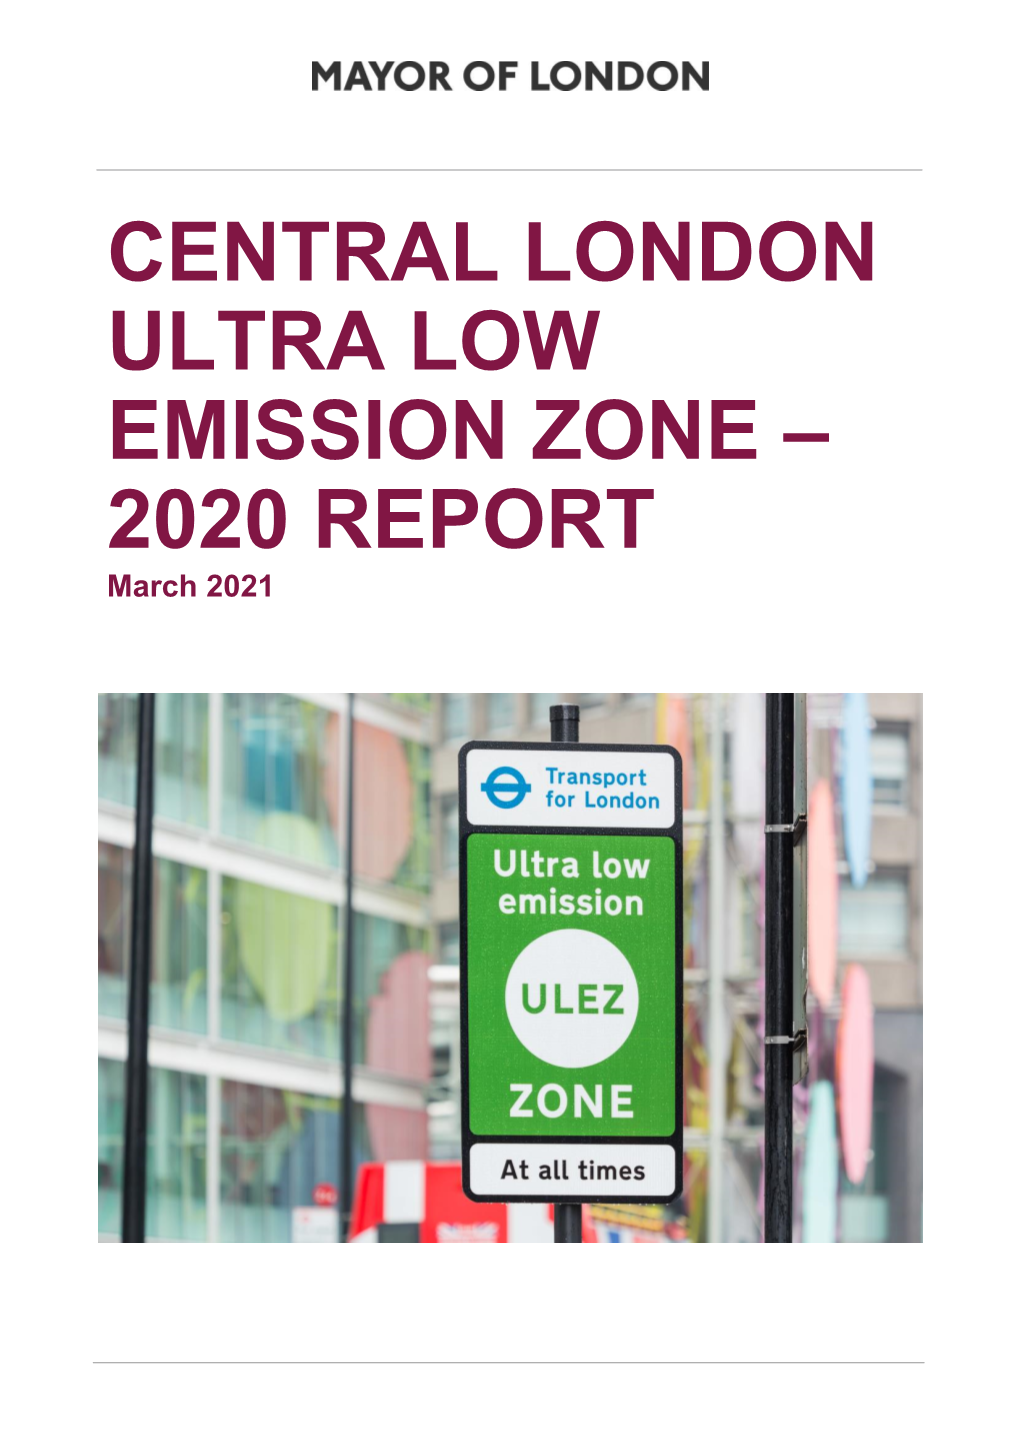 CENTRAL LONDON ULTRA LOW EMISSION ZONE – 2020 REPORT March 2021